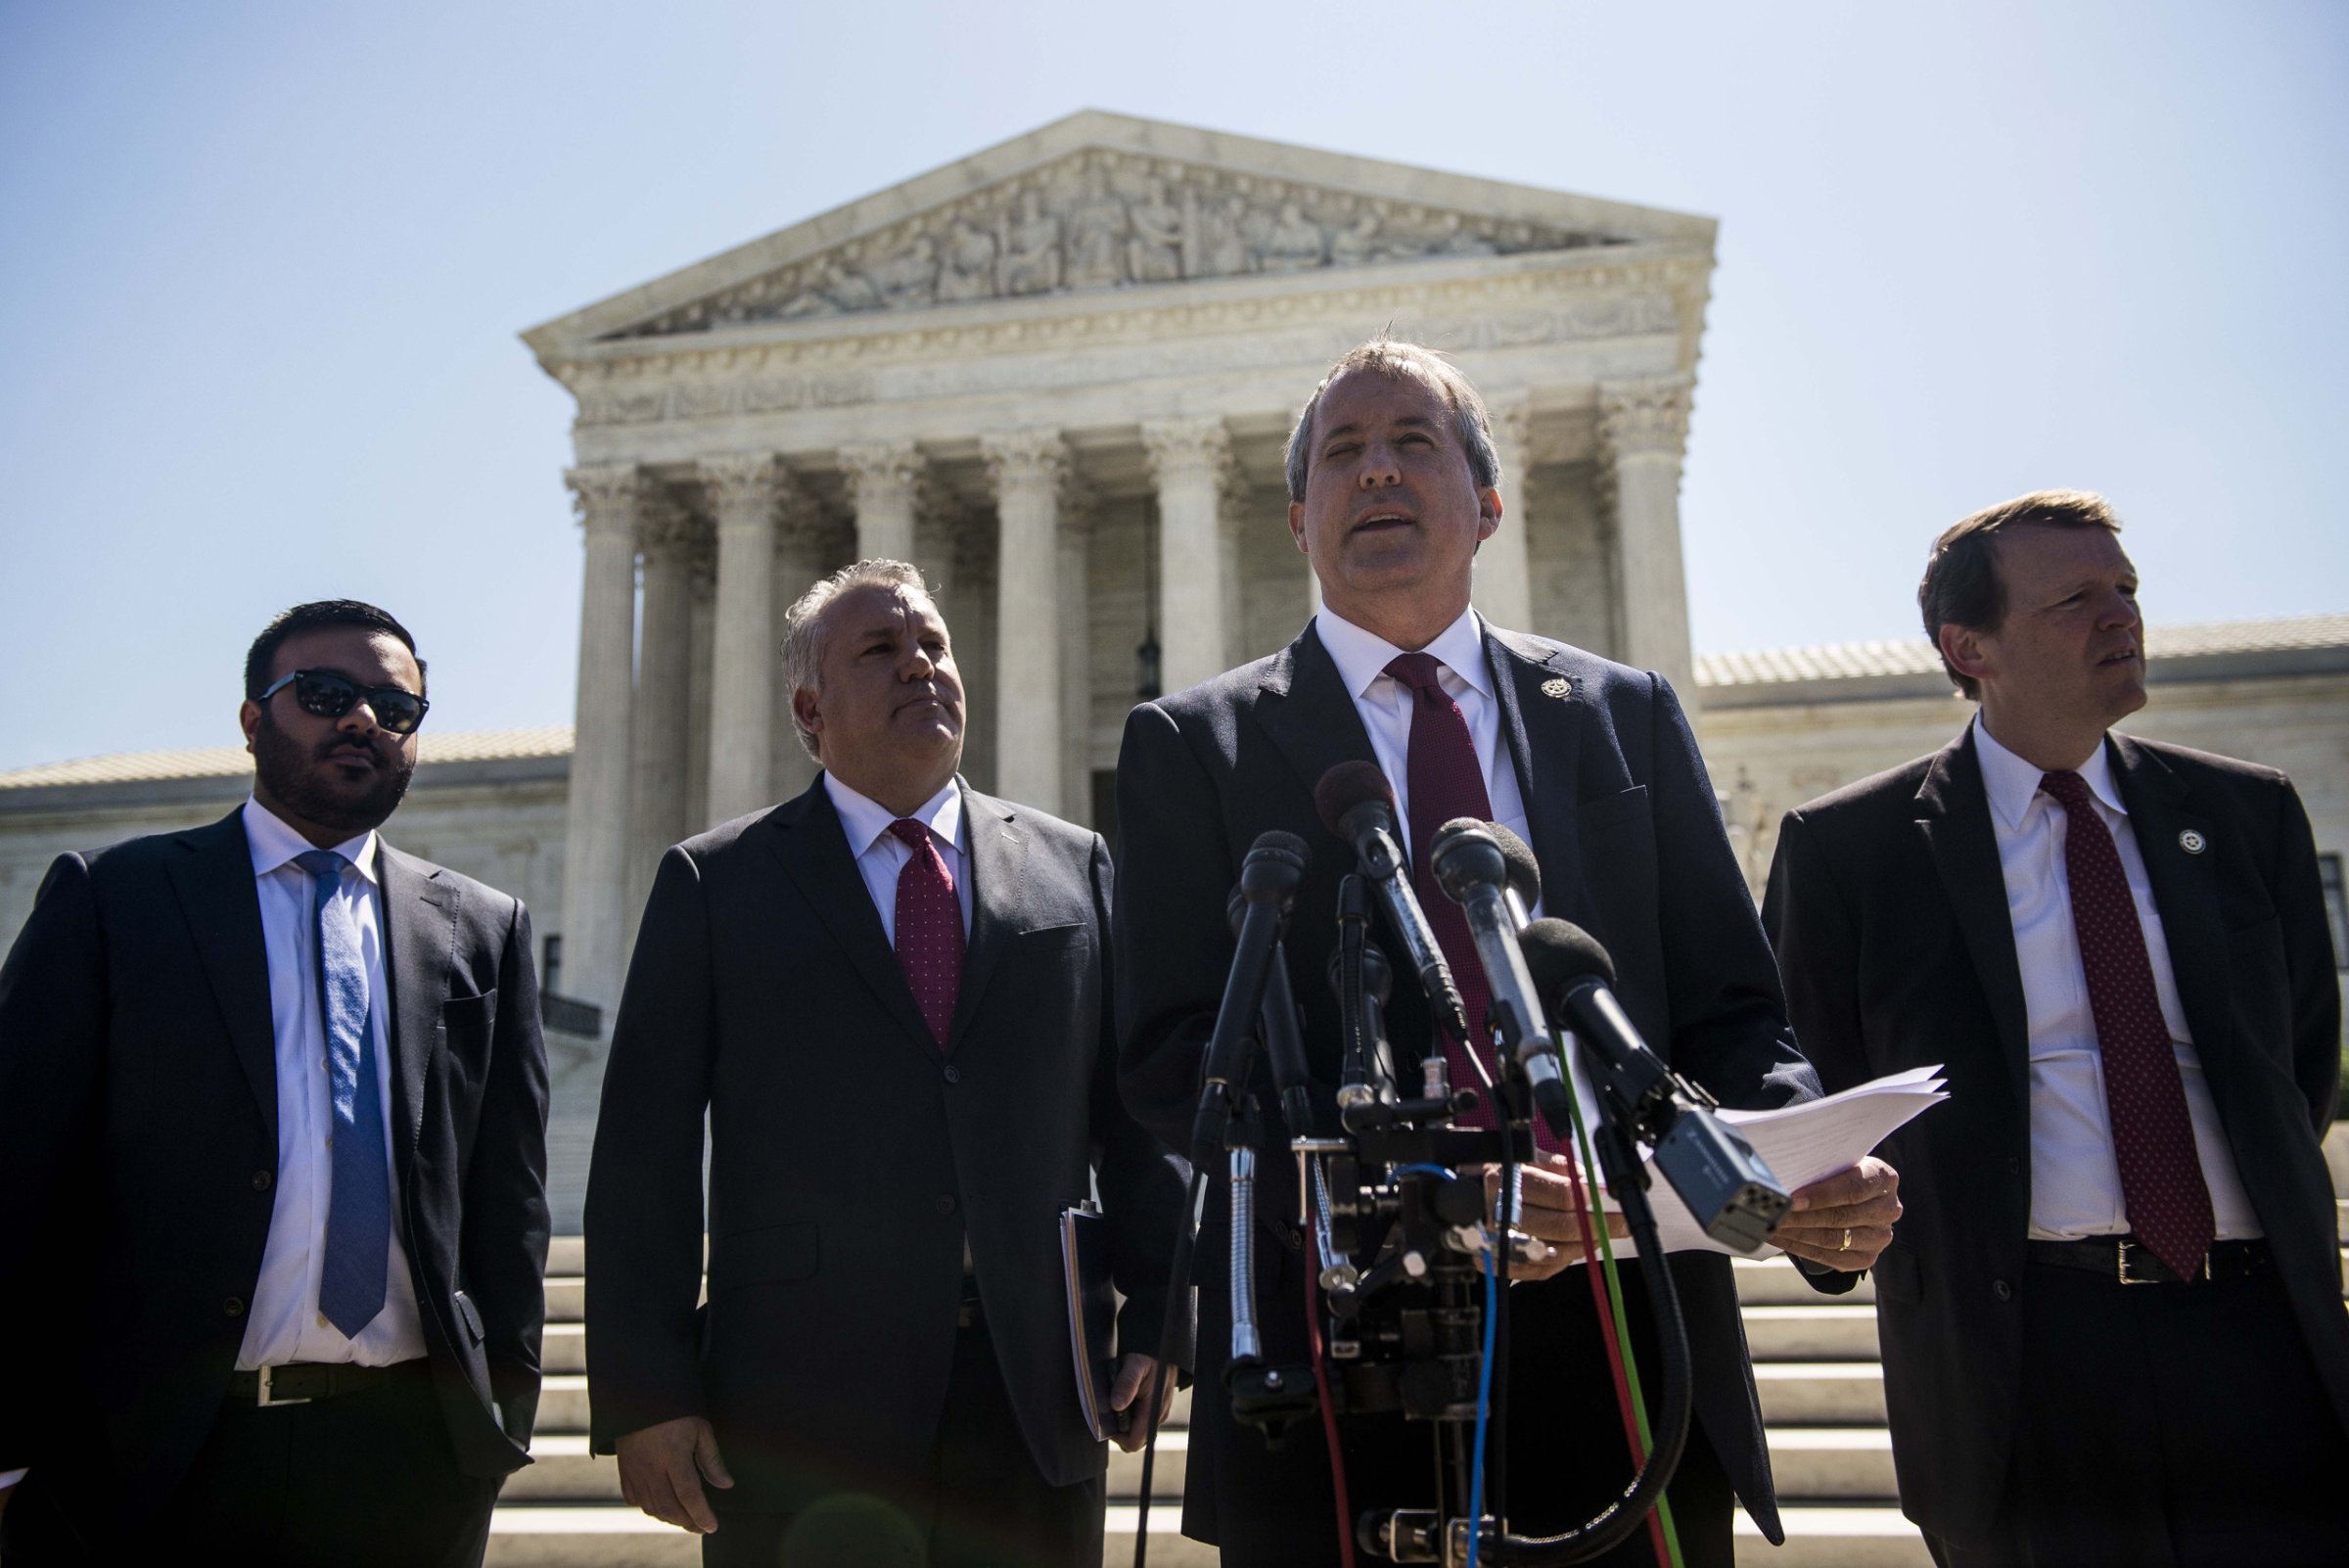 Texas Attorney General Ken Paxton speaks to reporters at a news conference outside the Supreme Court on Capitol Hill in Washington D.C. on June 9, 2016.